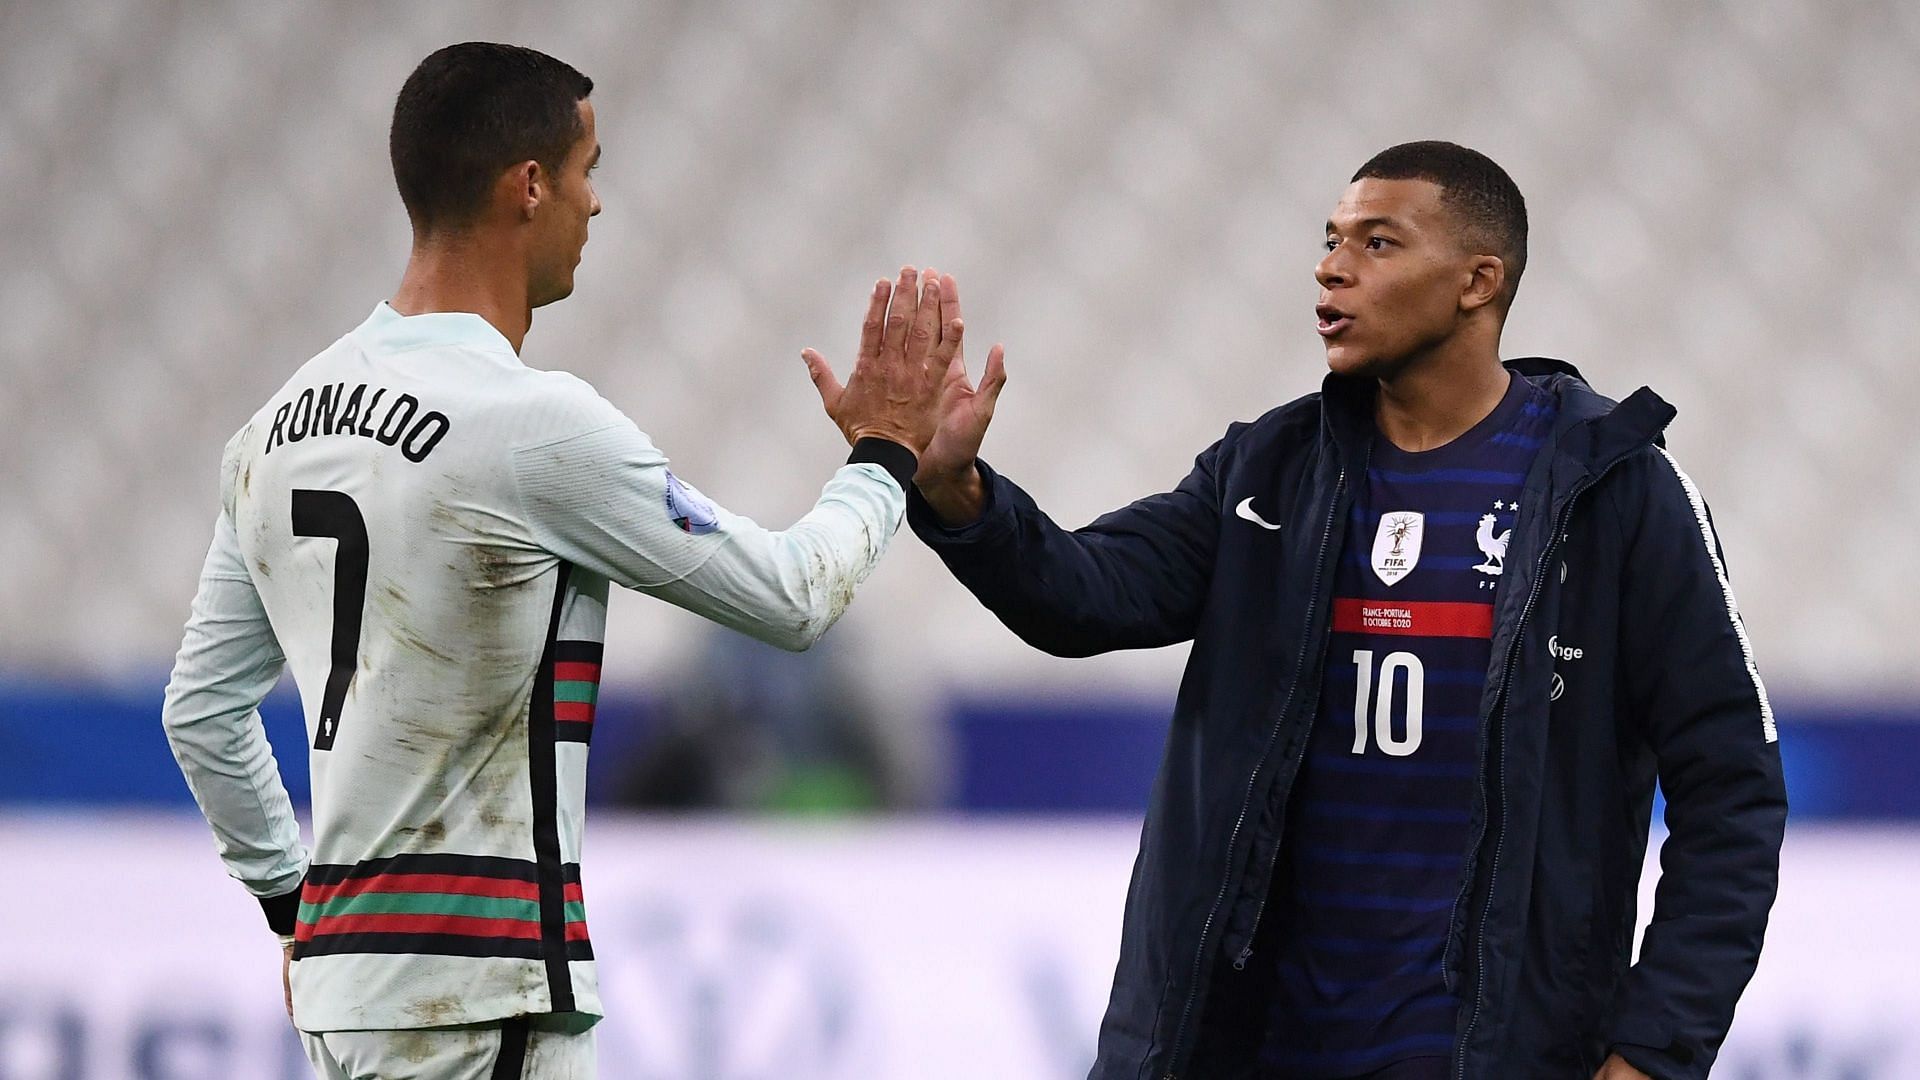 Kylian Mbappe clashed with his potential new landlord Ronaldo in 2020.